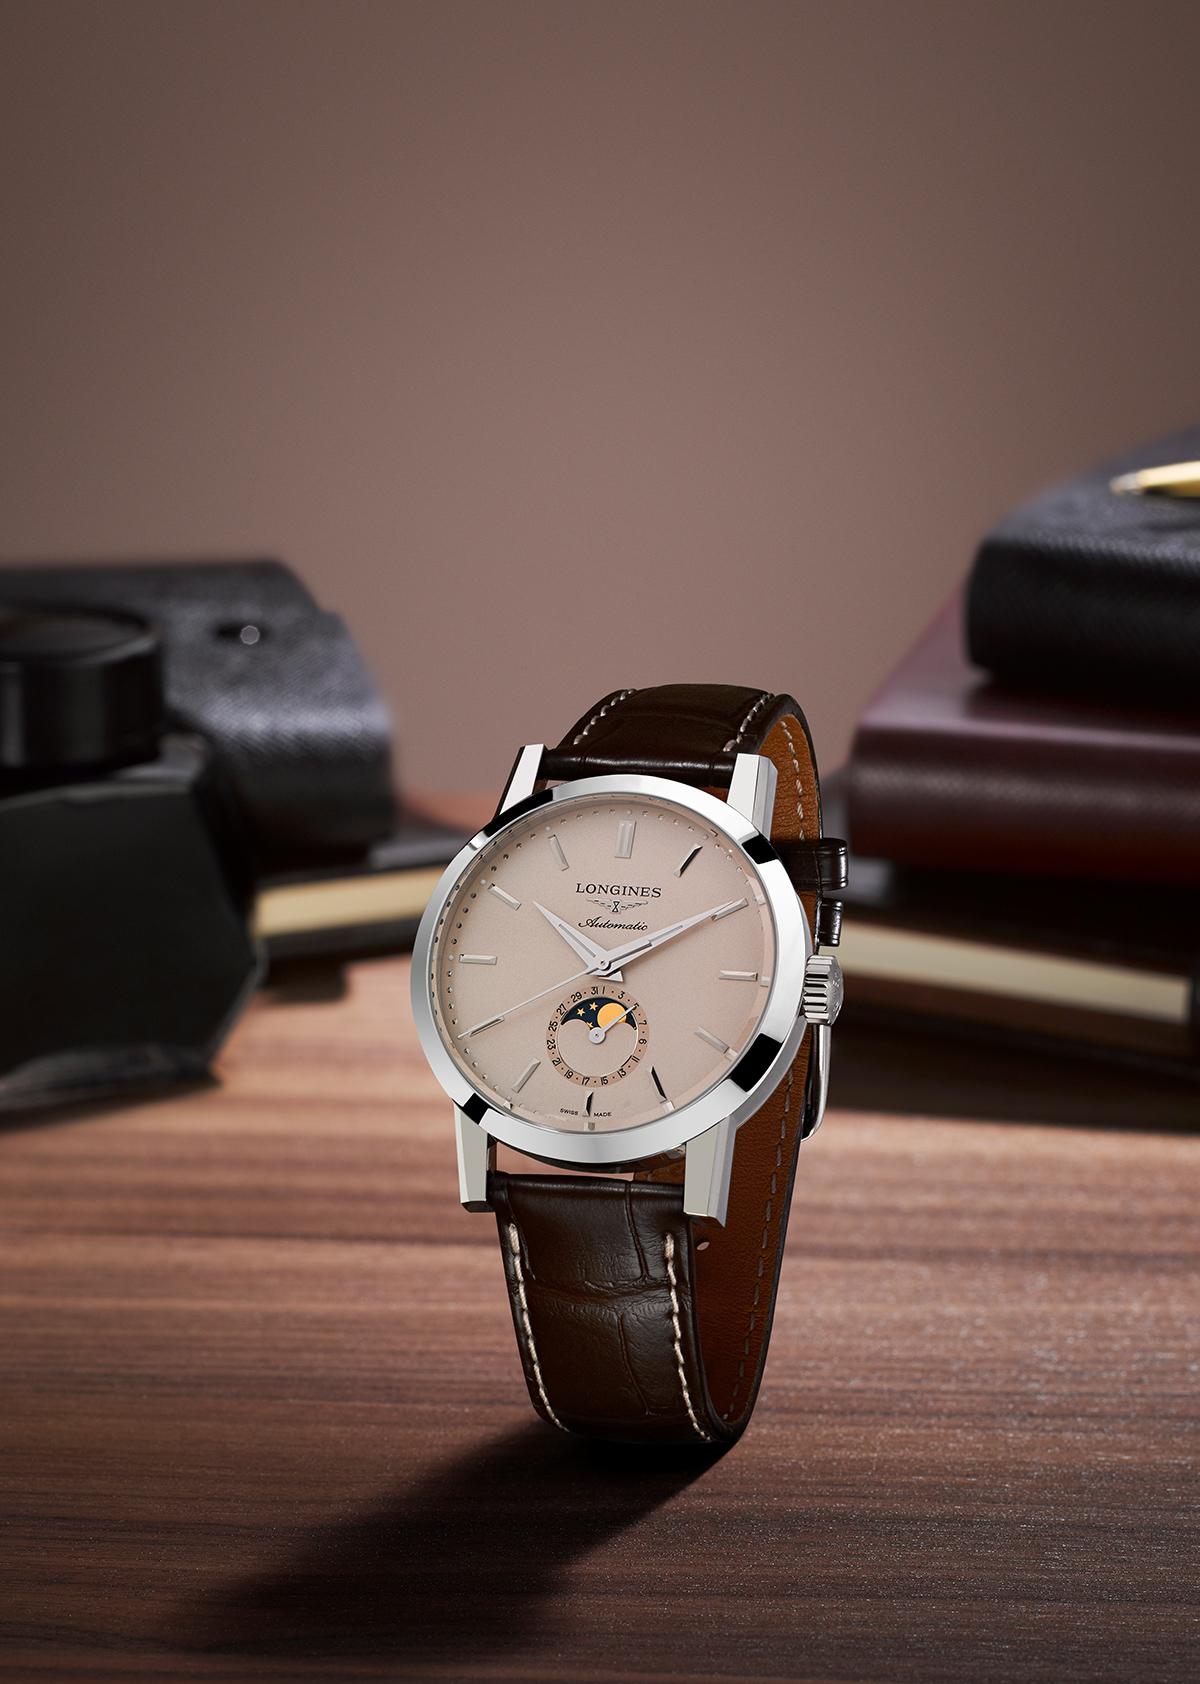 A New Chapter in the Longines 1832 Iconic Tale. The Longines 1832 Moonphase Men's Brown Leather Strap Watch with a unique moon-phase feature.